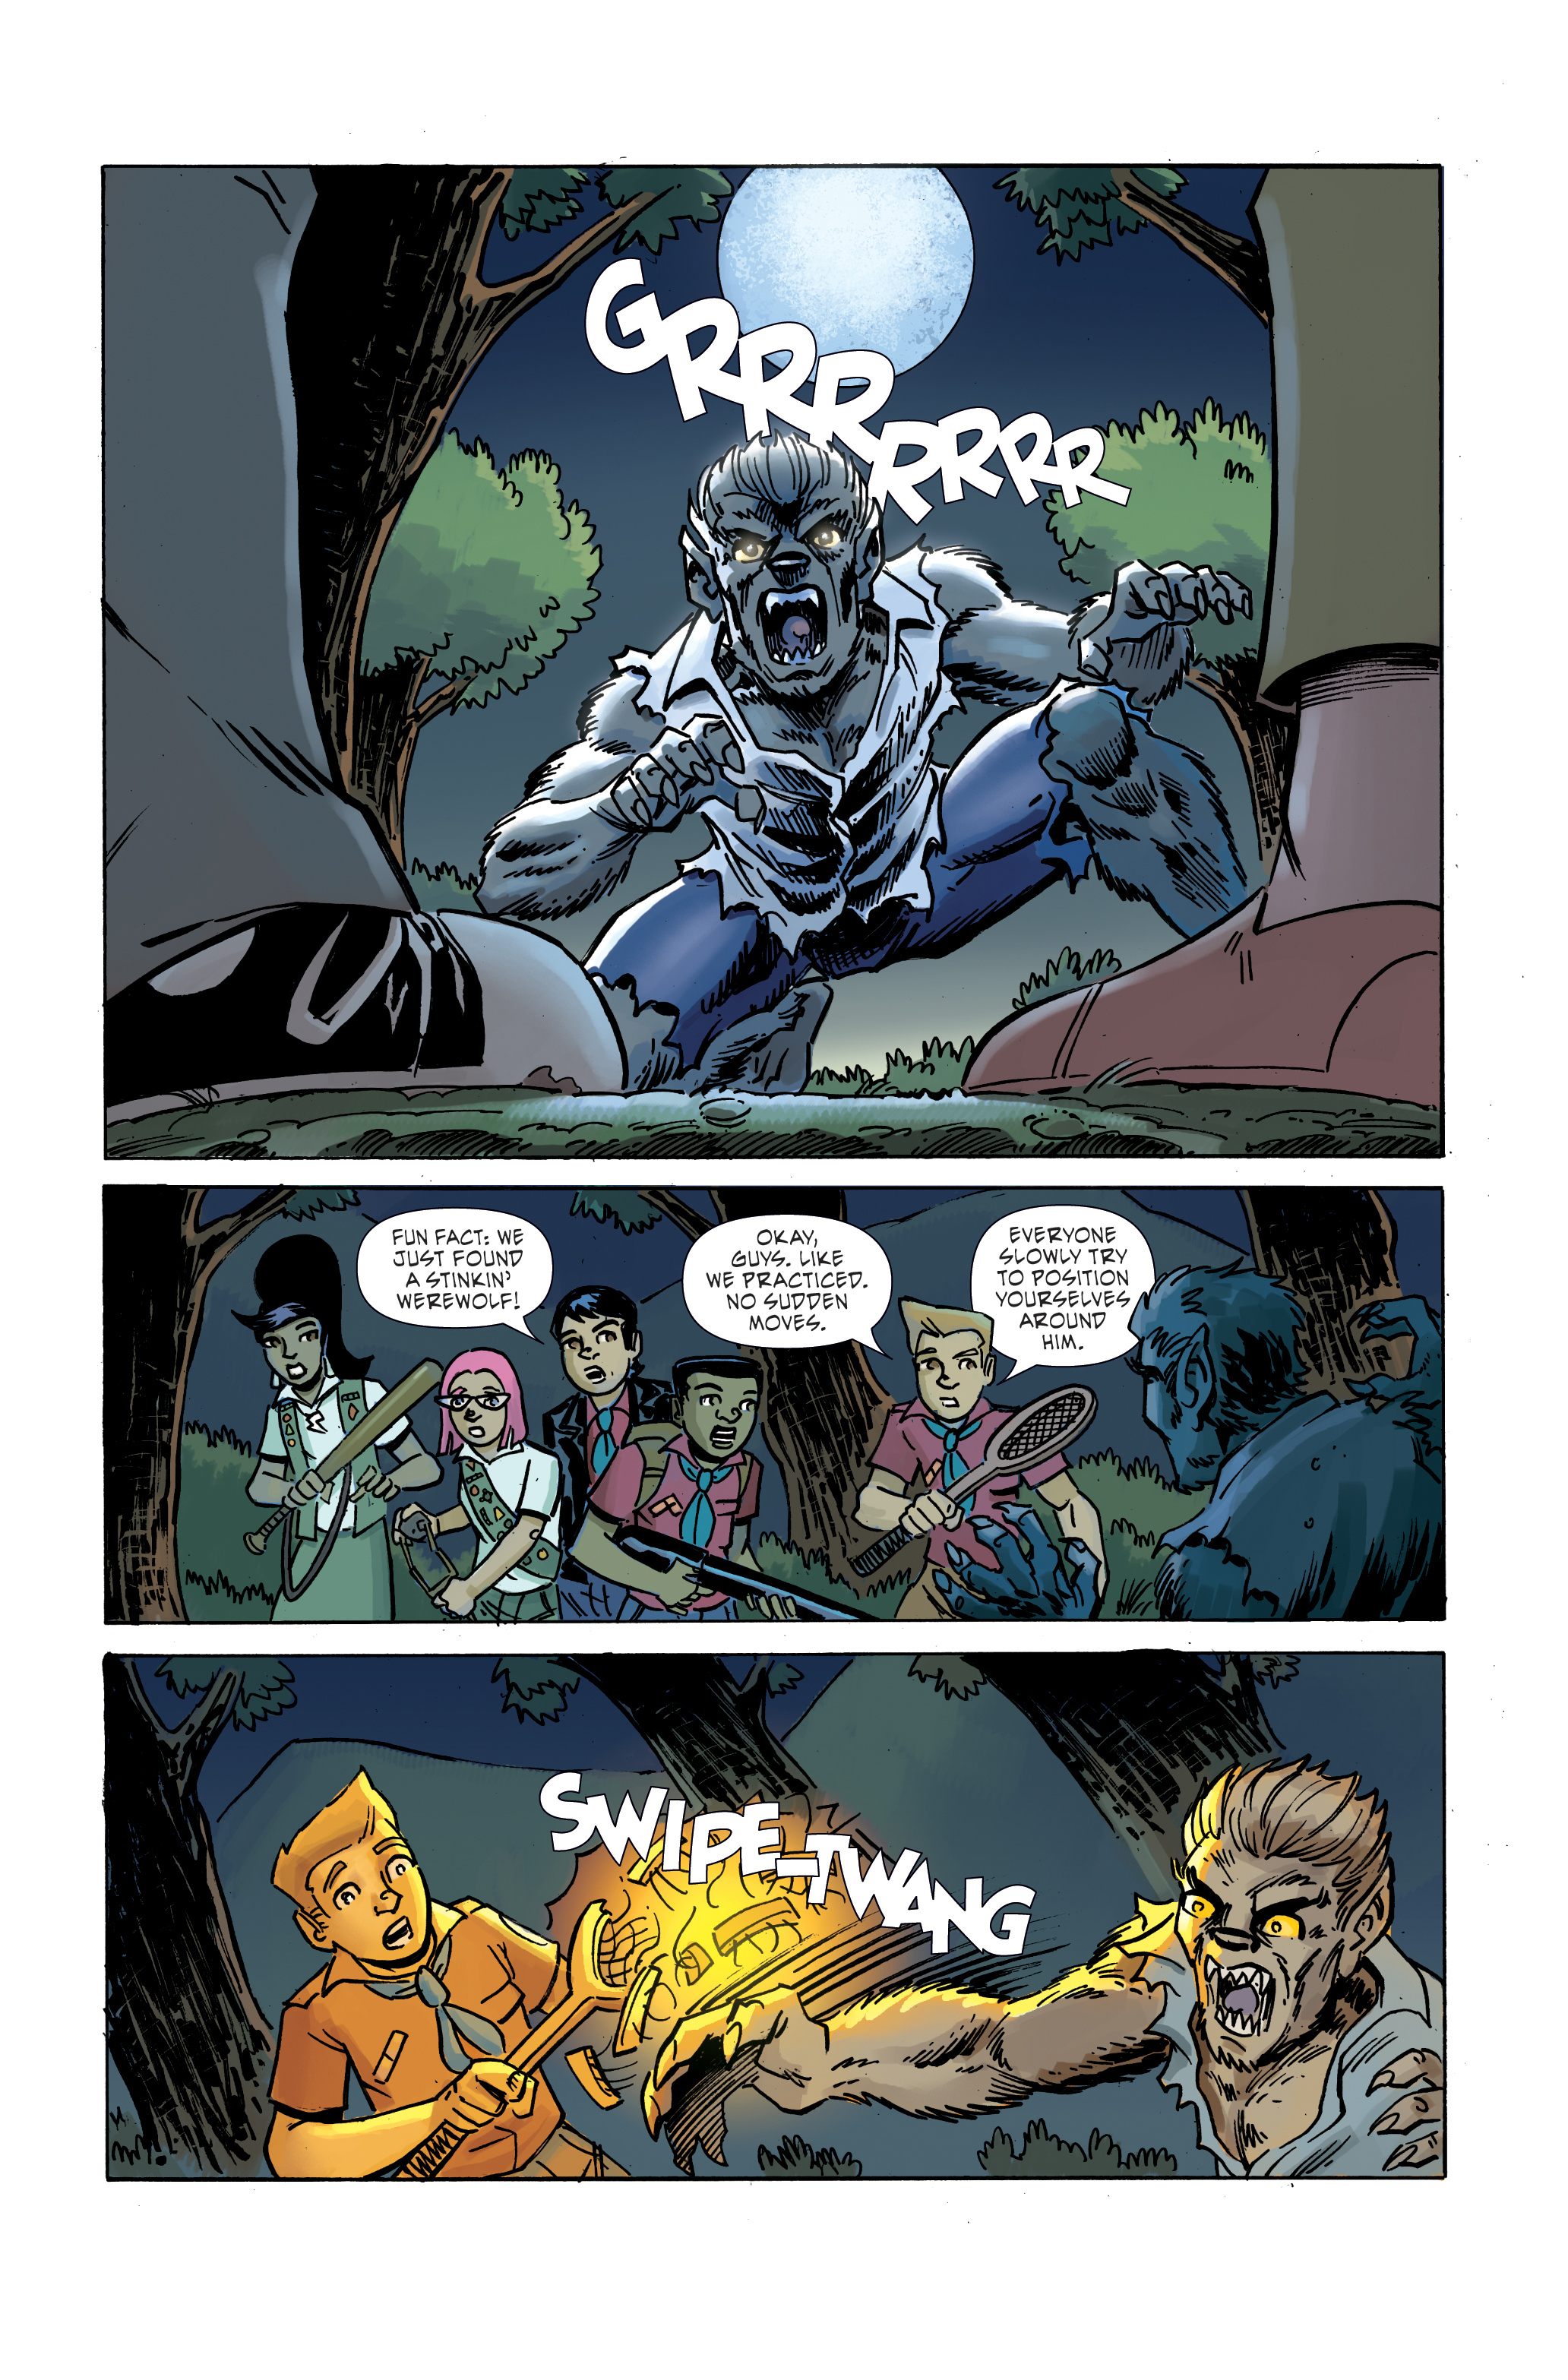 Ghoul Scouts Volume 2 #1 Page 20.jpg